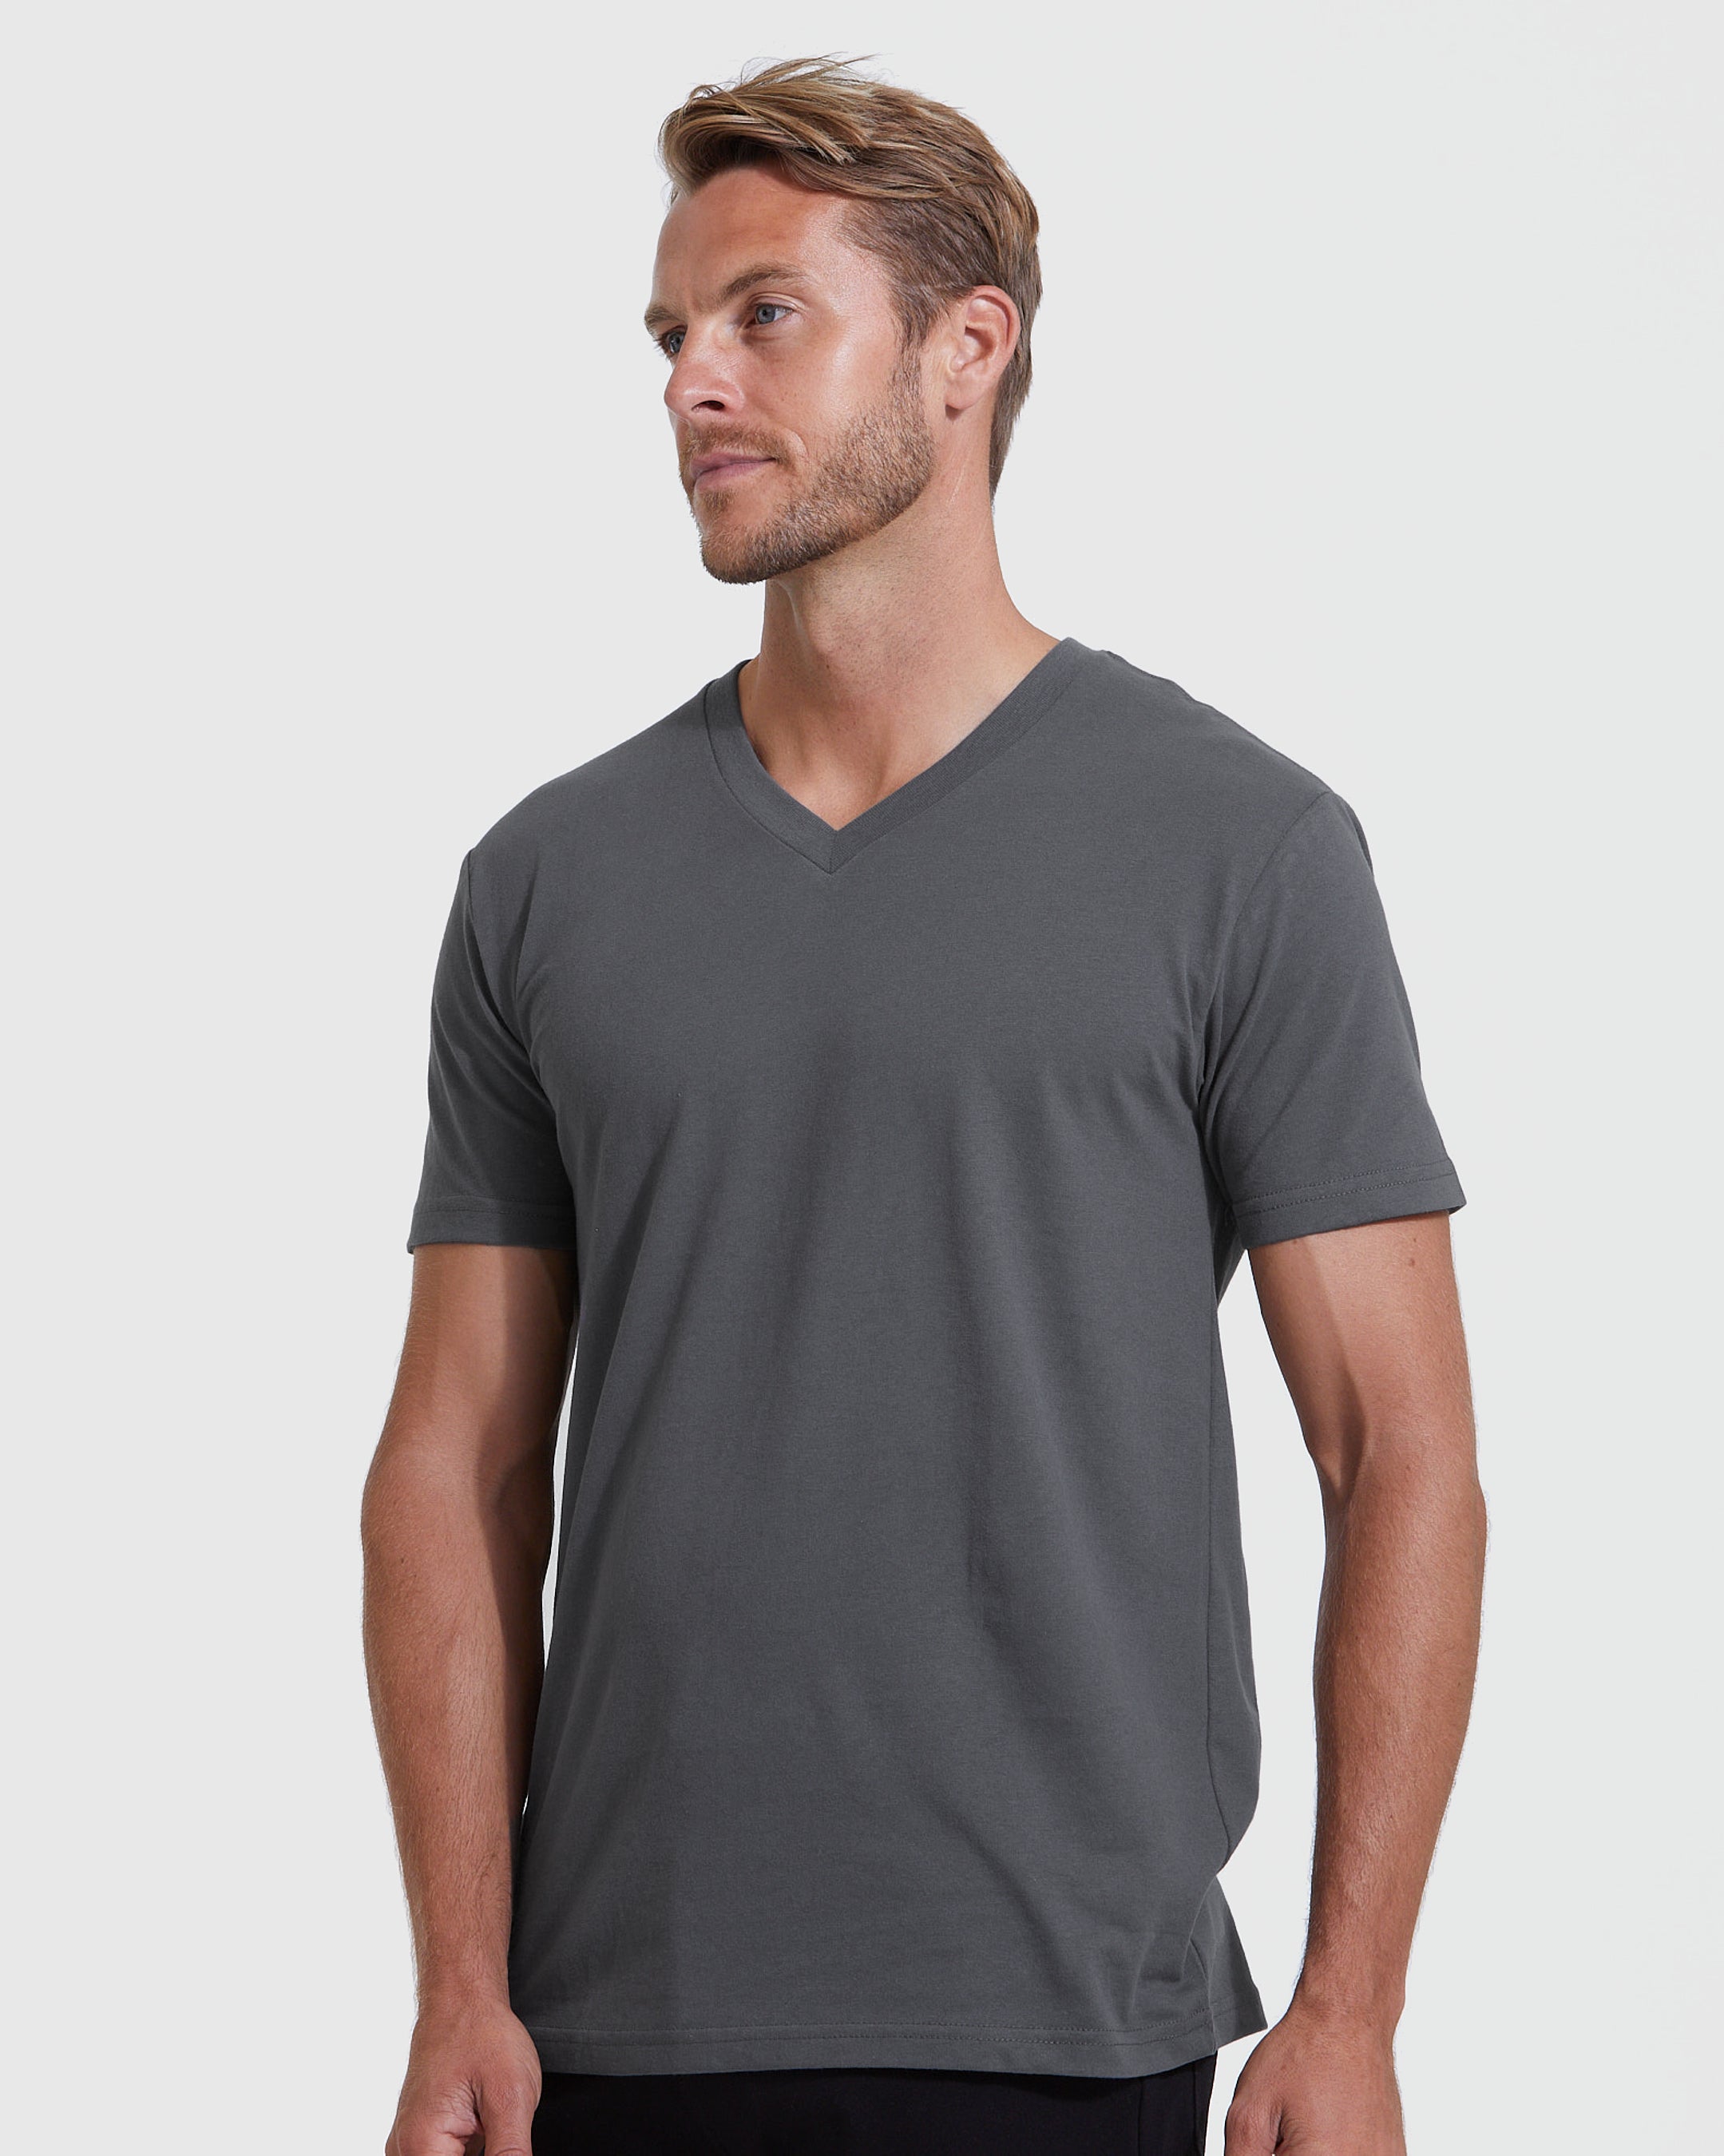 The Color V-Neck 3-Pack – True Classic